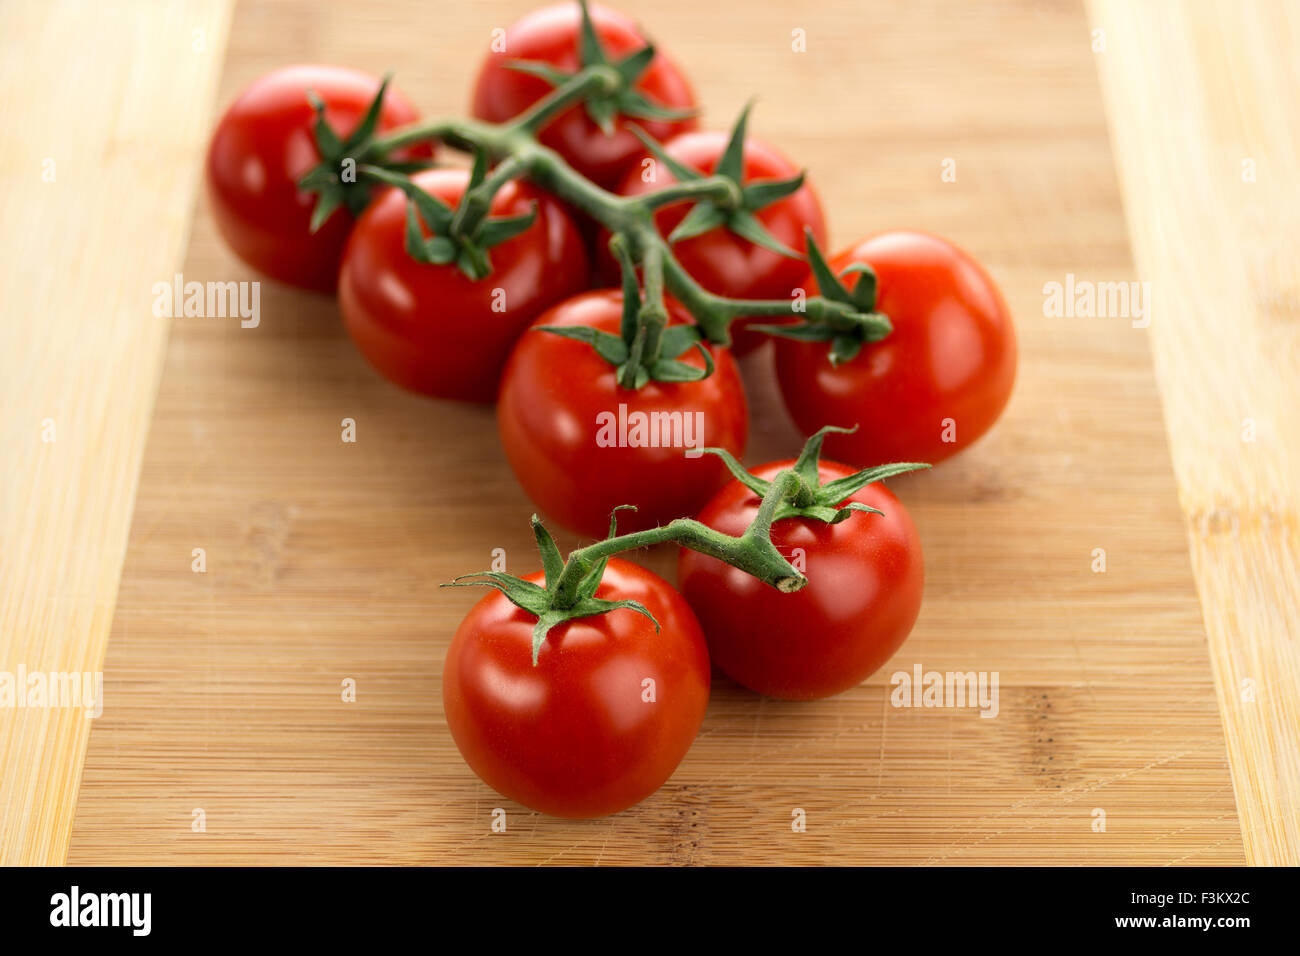 Red ripe cherry tomatoes with vines on a wooden cutting board. Macro view with shallow depth of field. Stock Photo